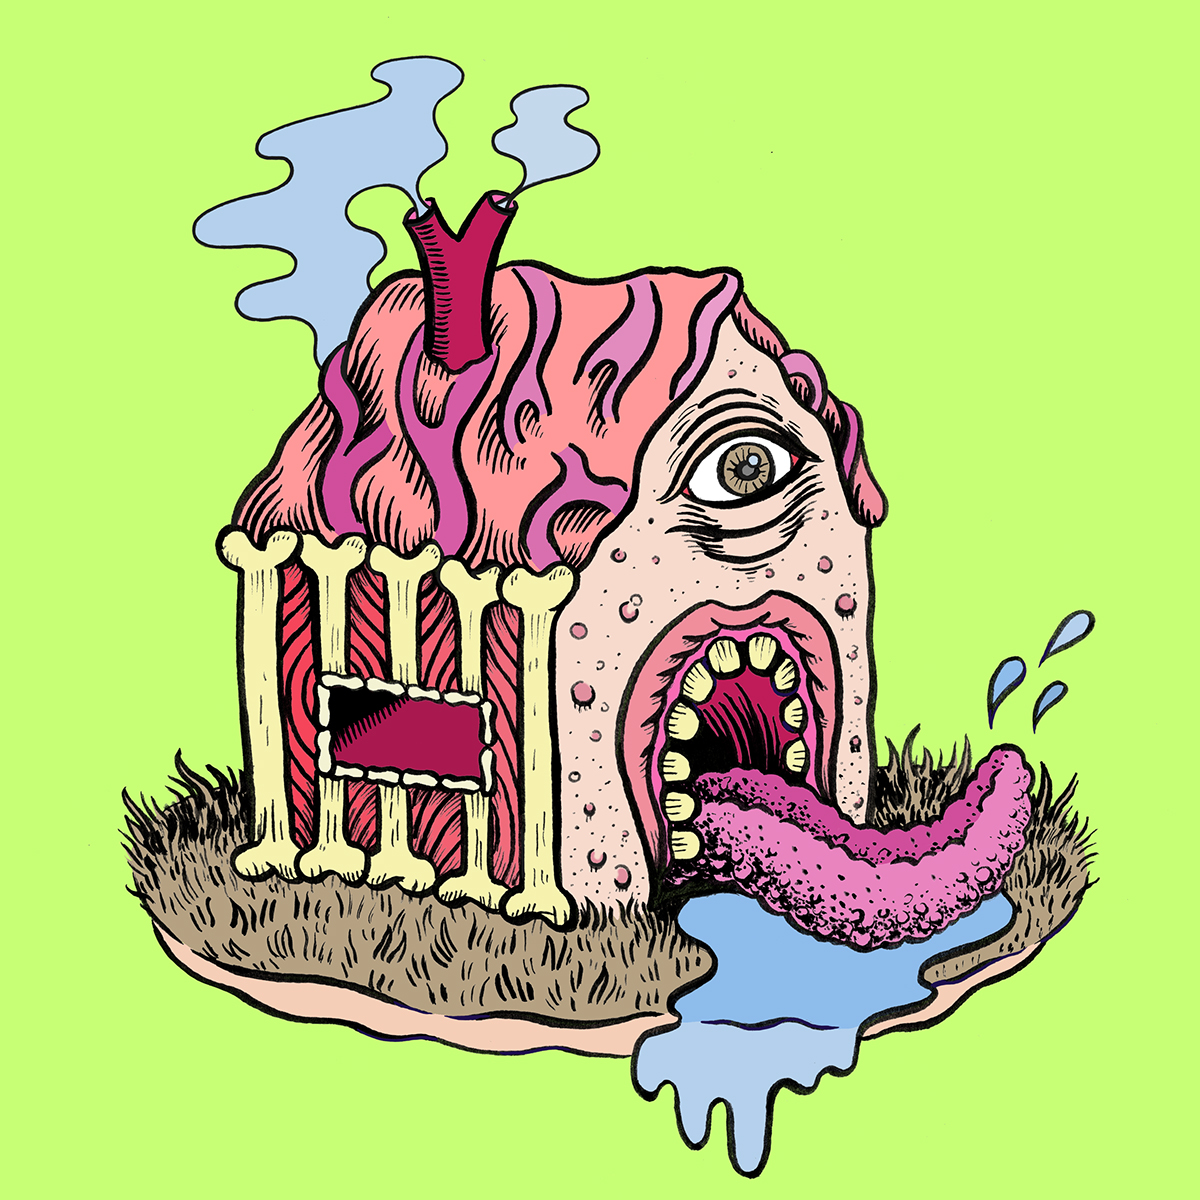 digital surreal Personal Work quirky weird colorful house dream inktober